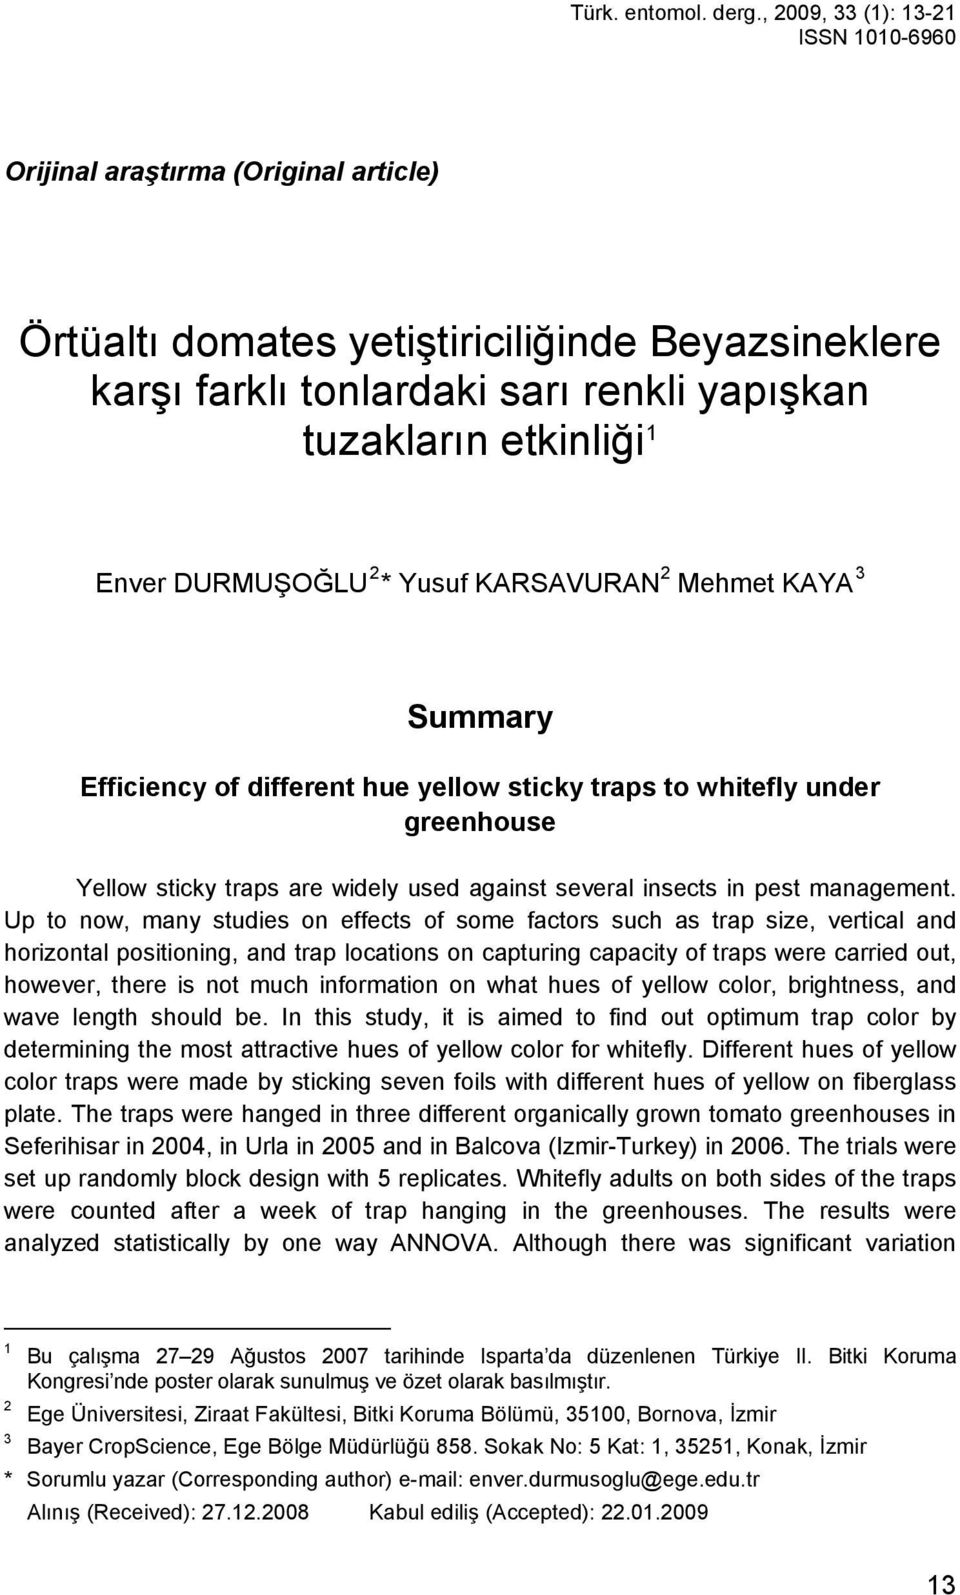 DURMUŞOĞLU 2 * Yusuf KARSAVURAN 2 Mehmet KAYA 3 Summary Efficiency of different hue yellow sticky traps to whitefly under greenhouse Yellow sticky traps are widely used against several insects in